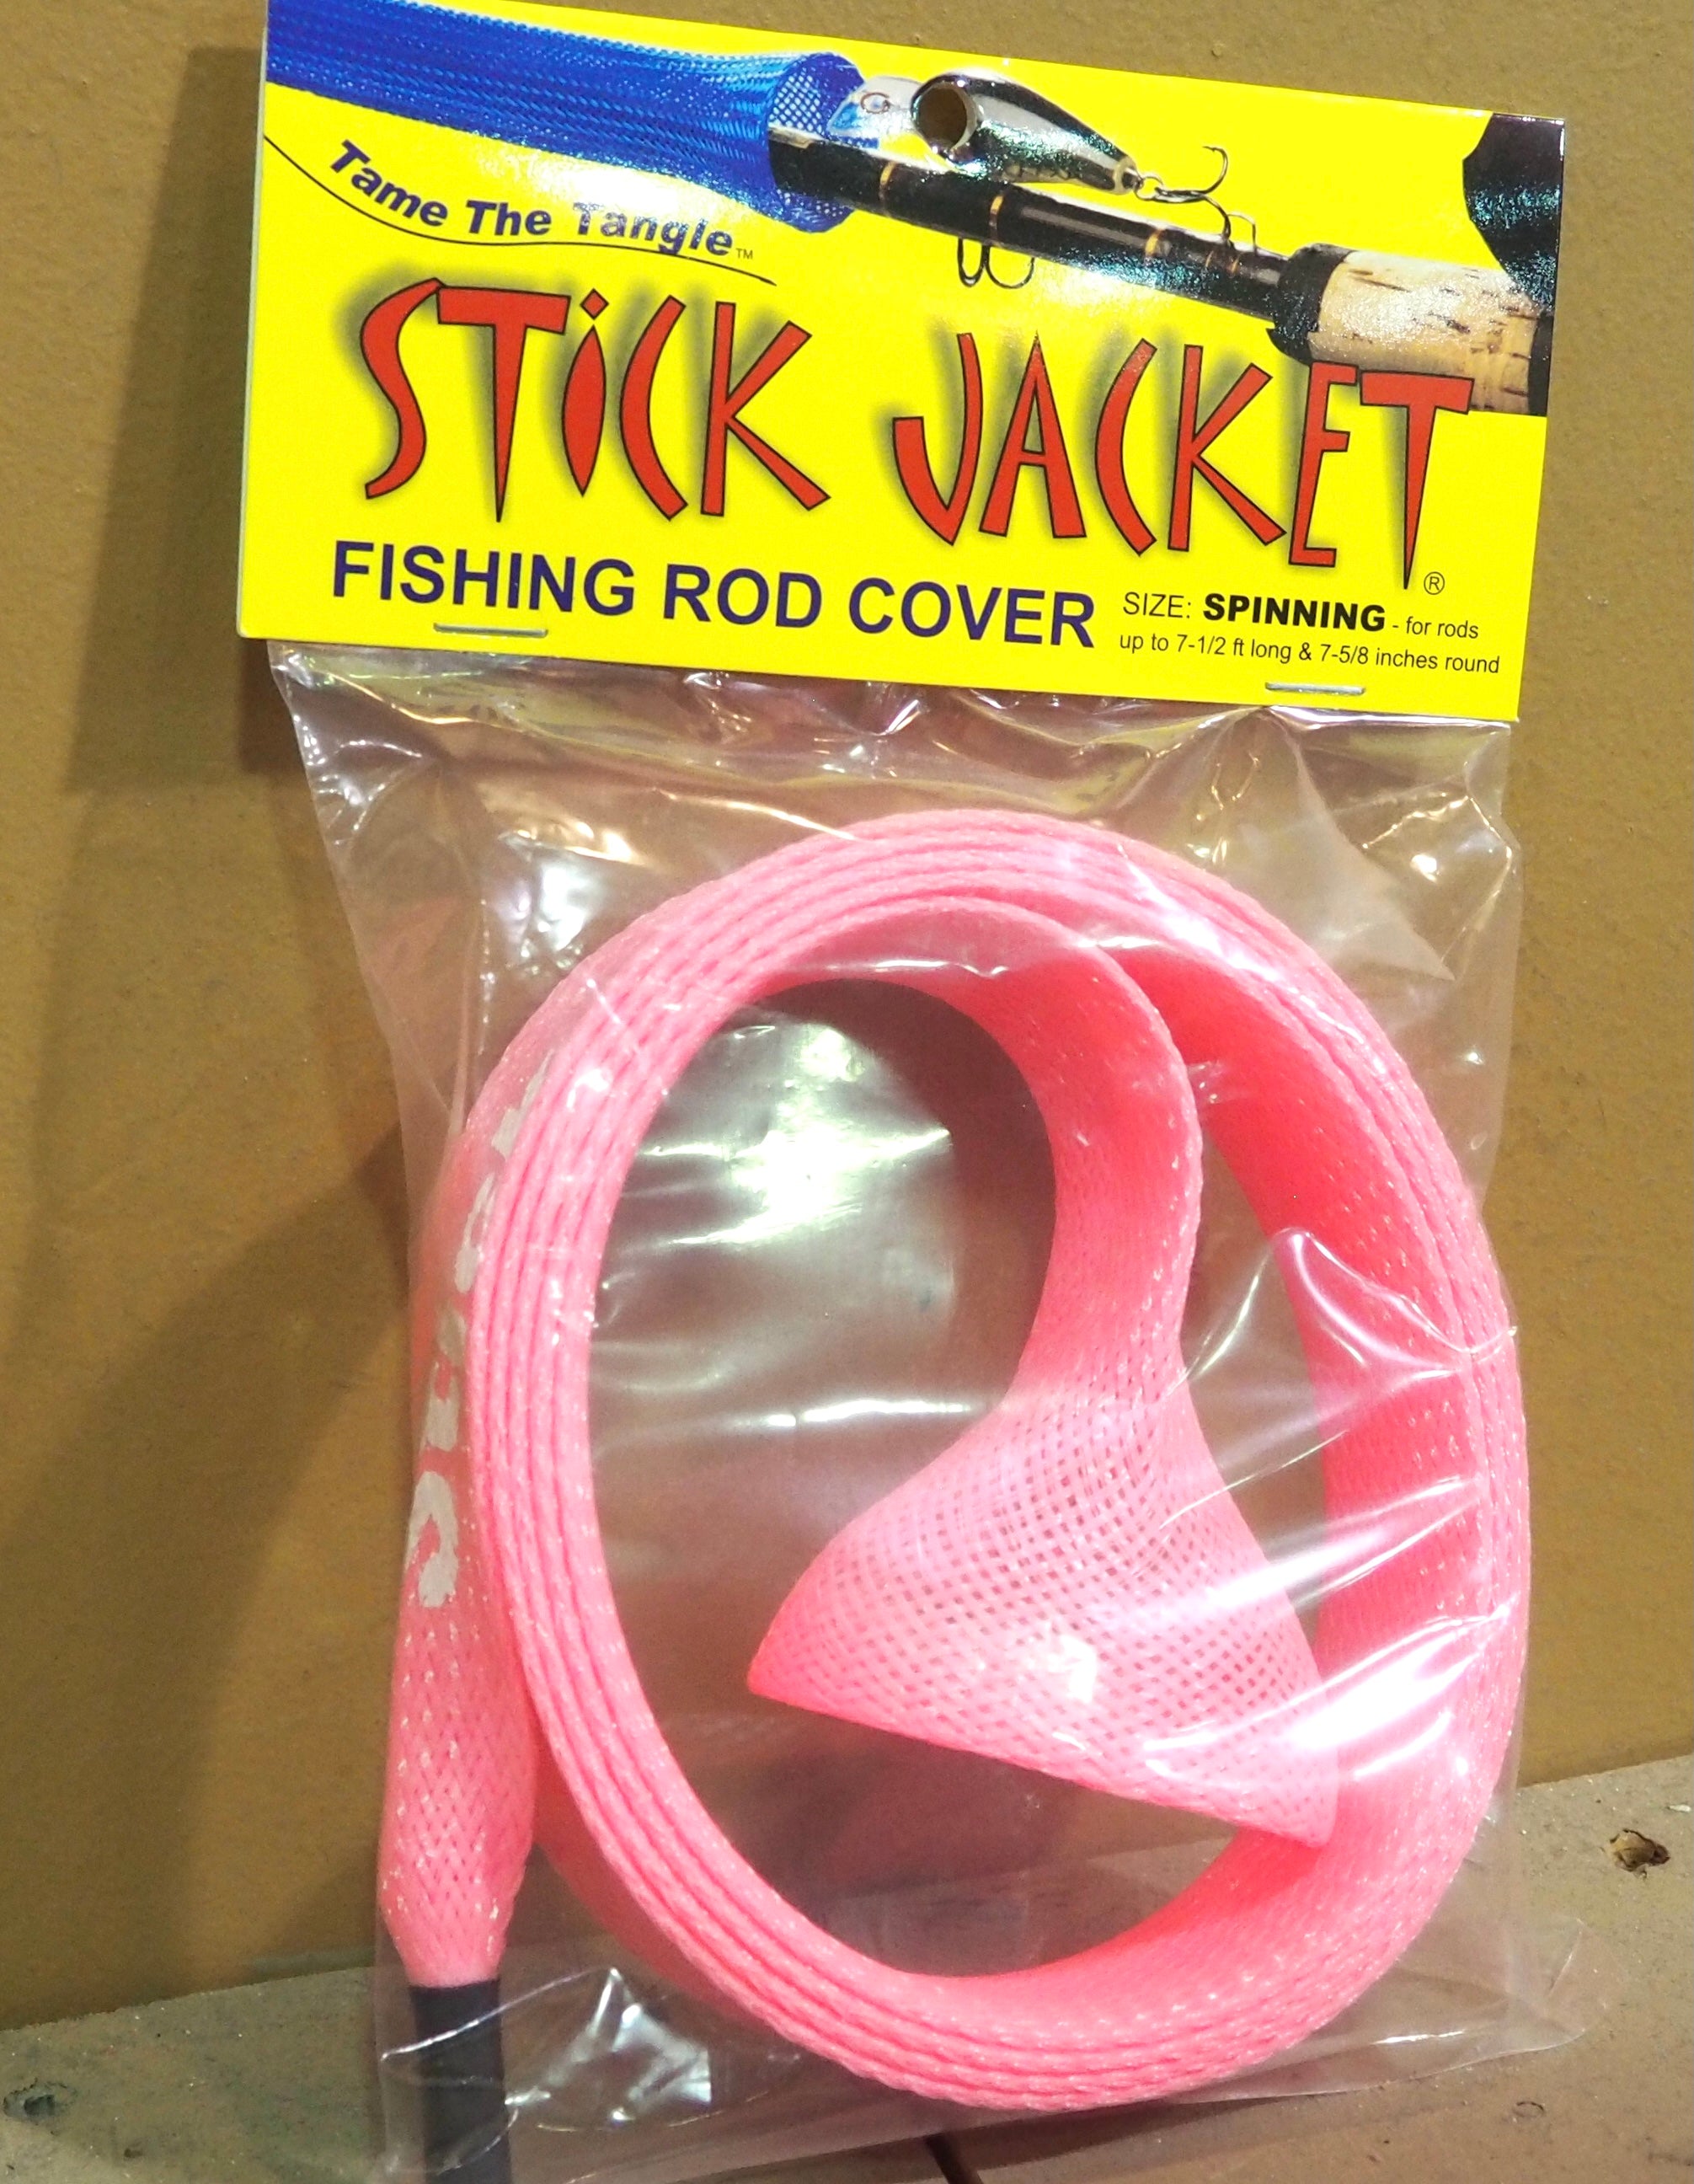 Stick Jacket Fishing Rod Covers Spinning Size — Fin & Feather